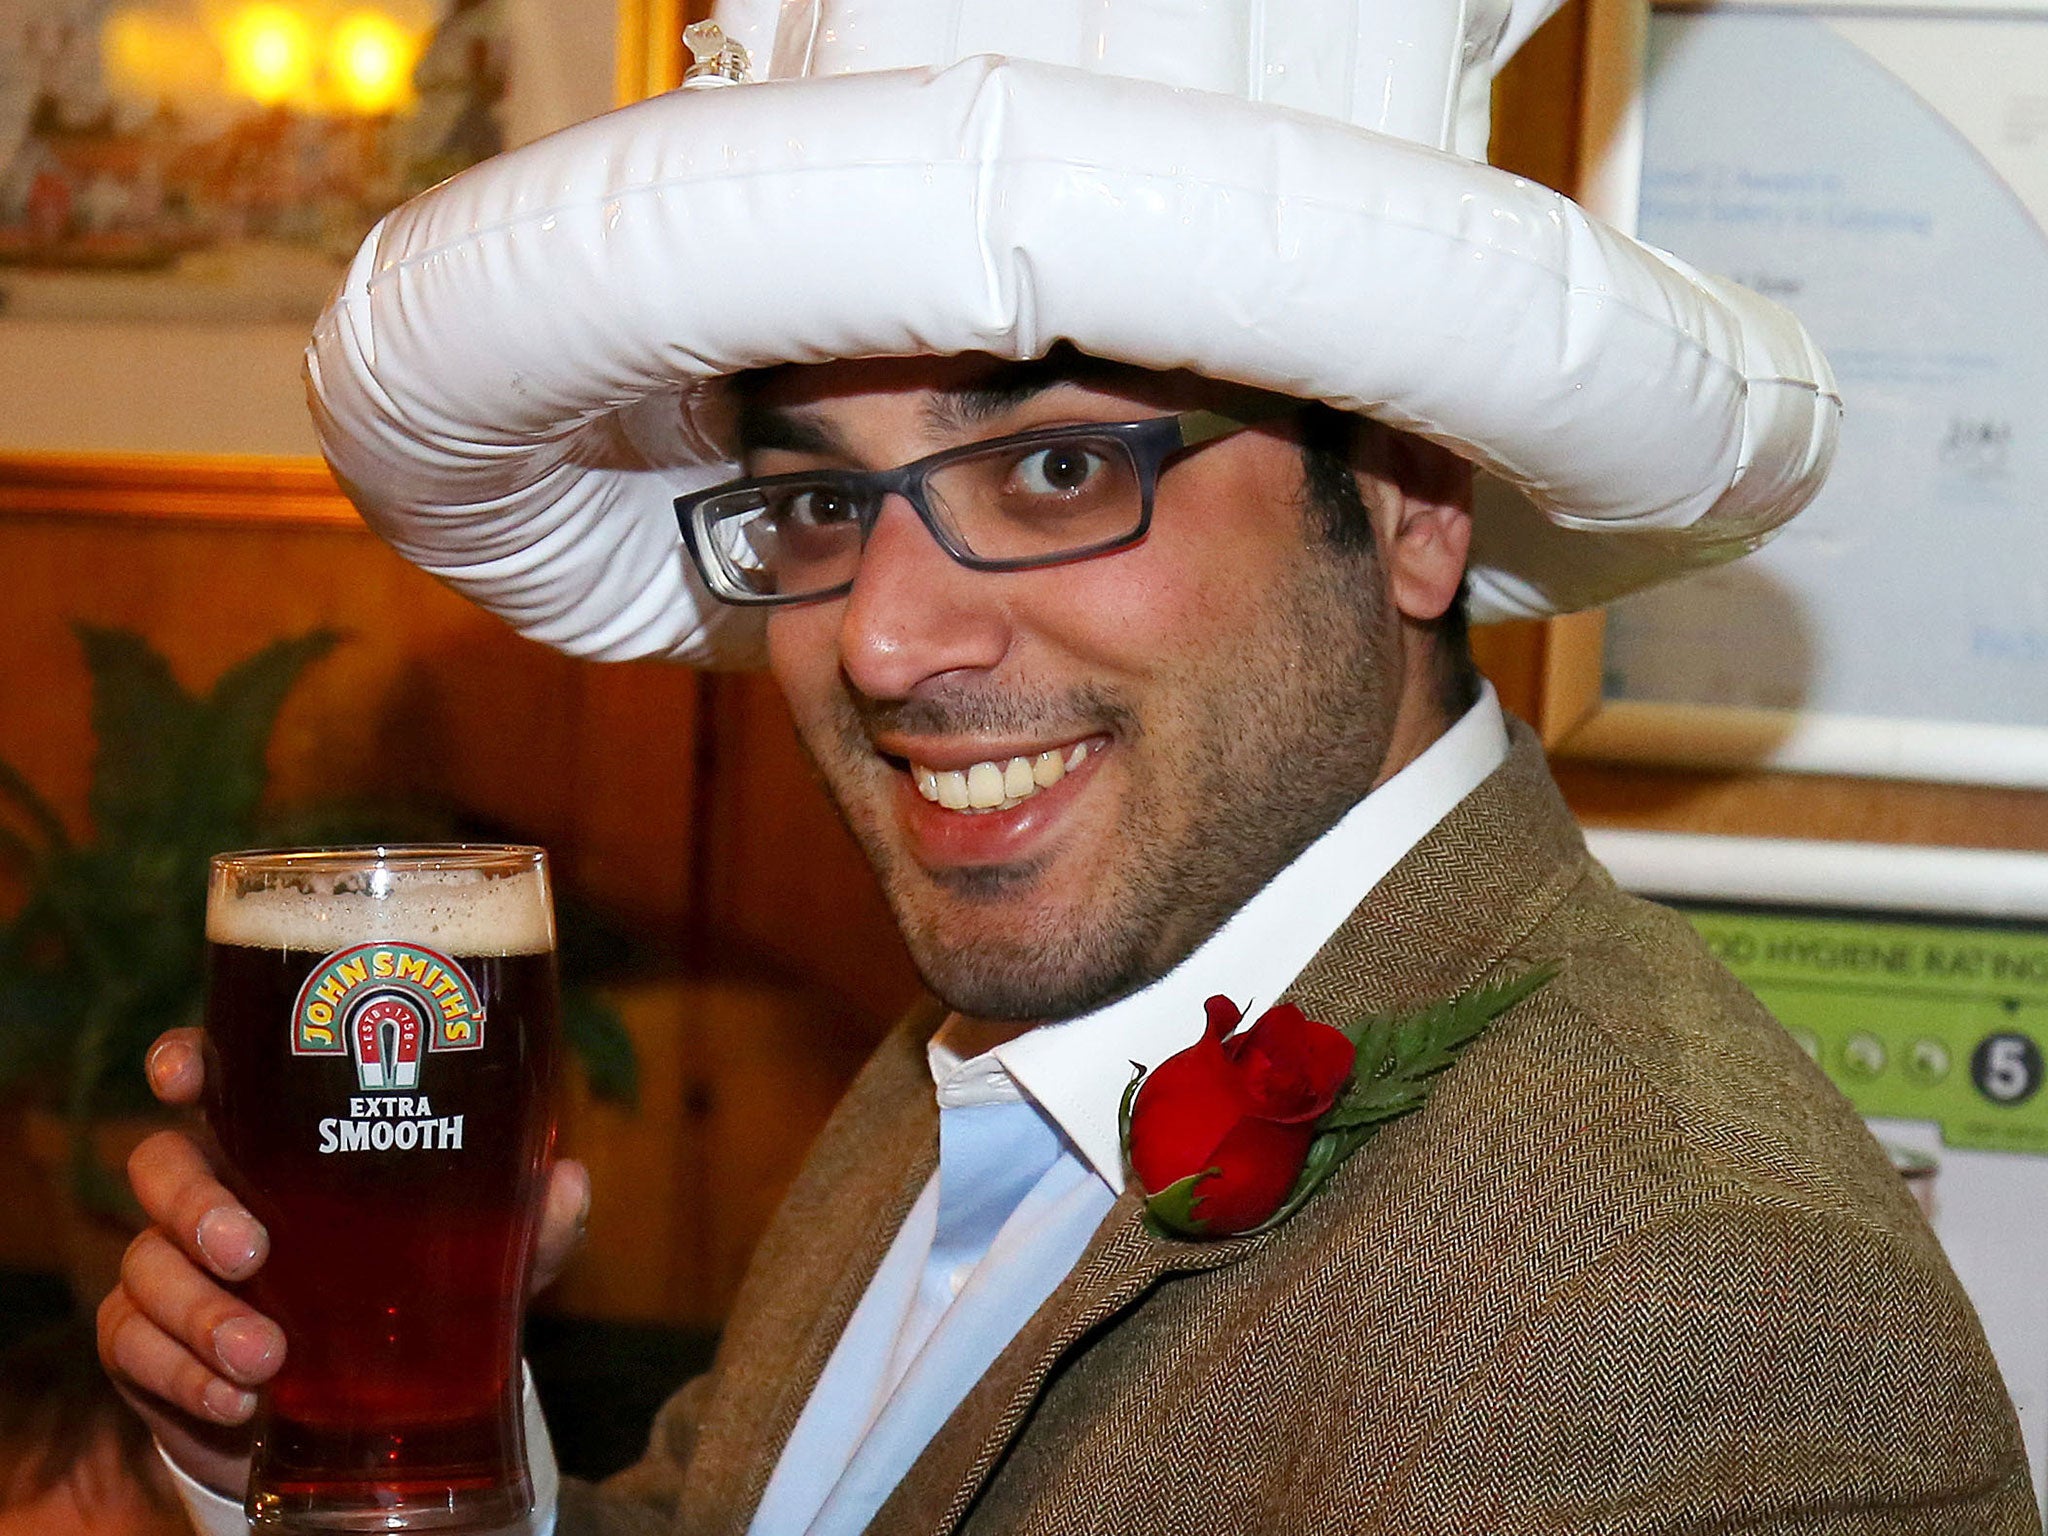 Blogger-turned-Ukip politician Raheem Kassam said he could not answer our questions about business tax